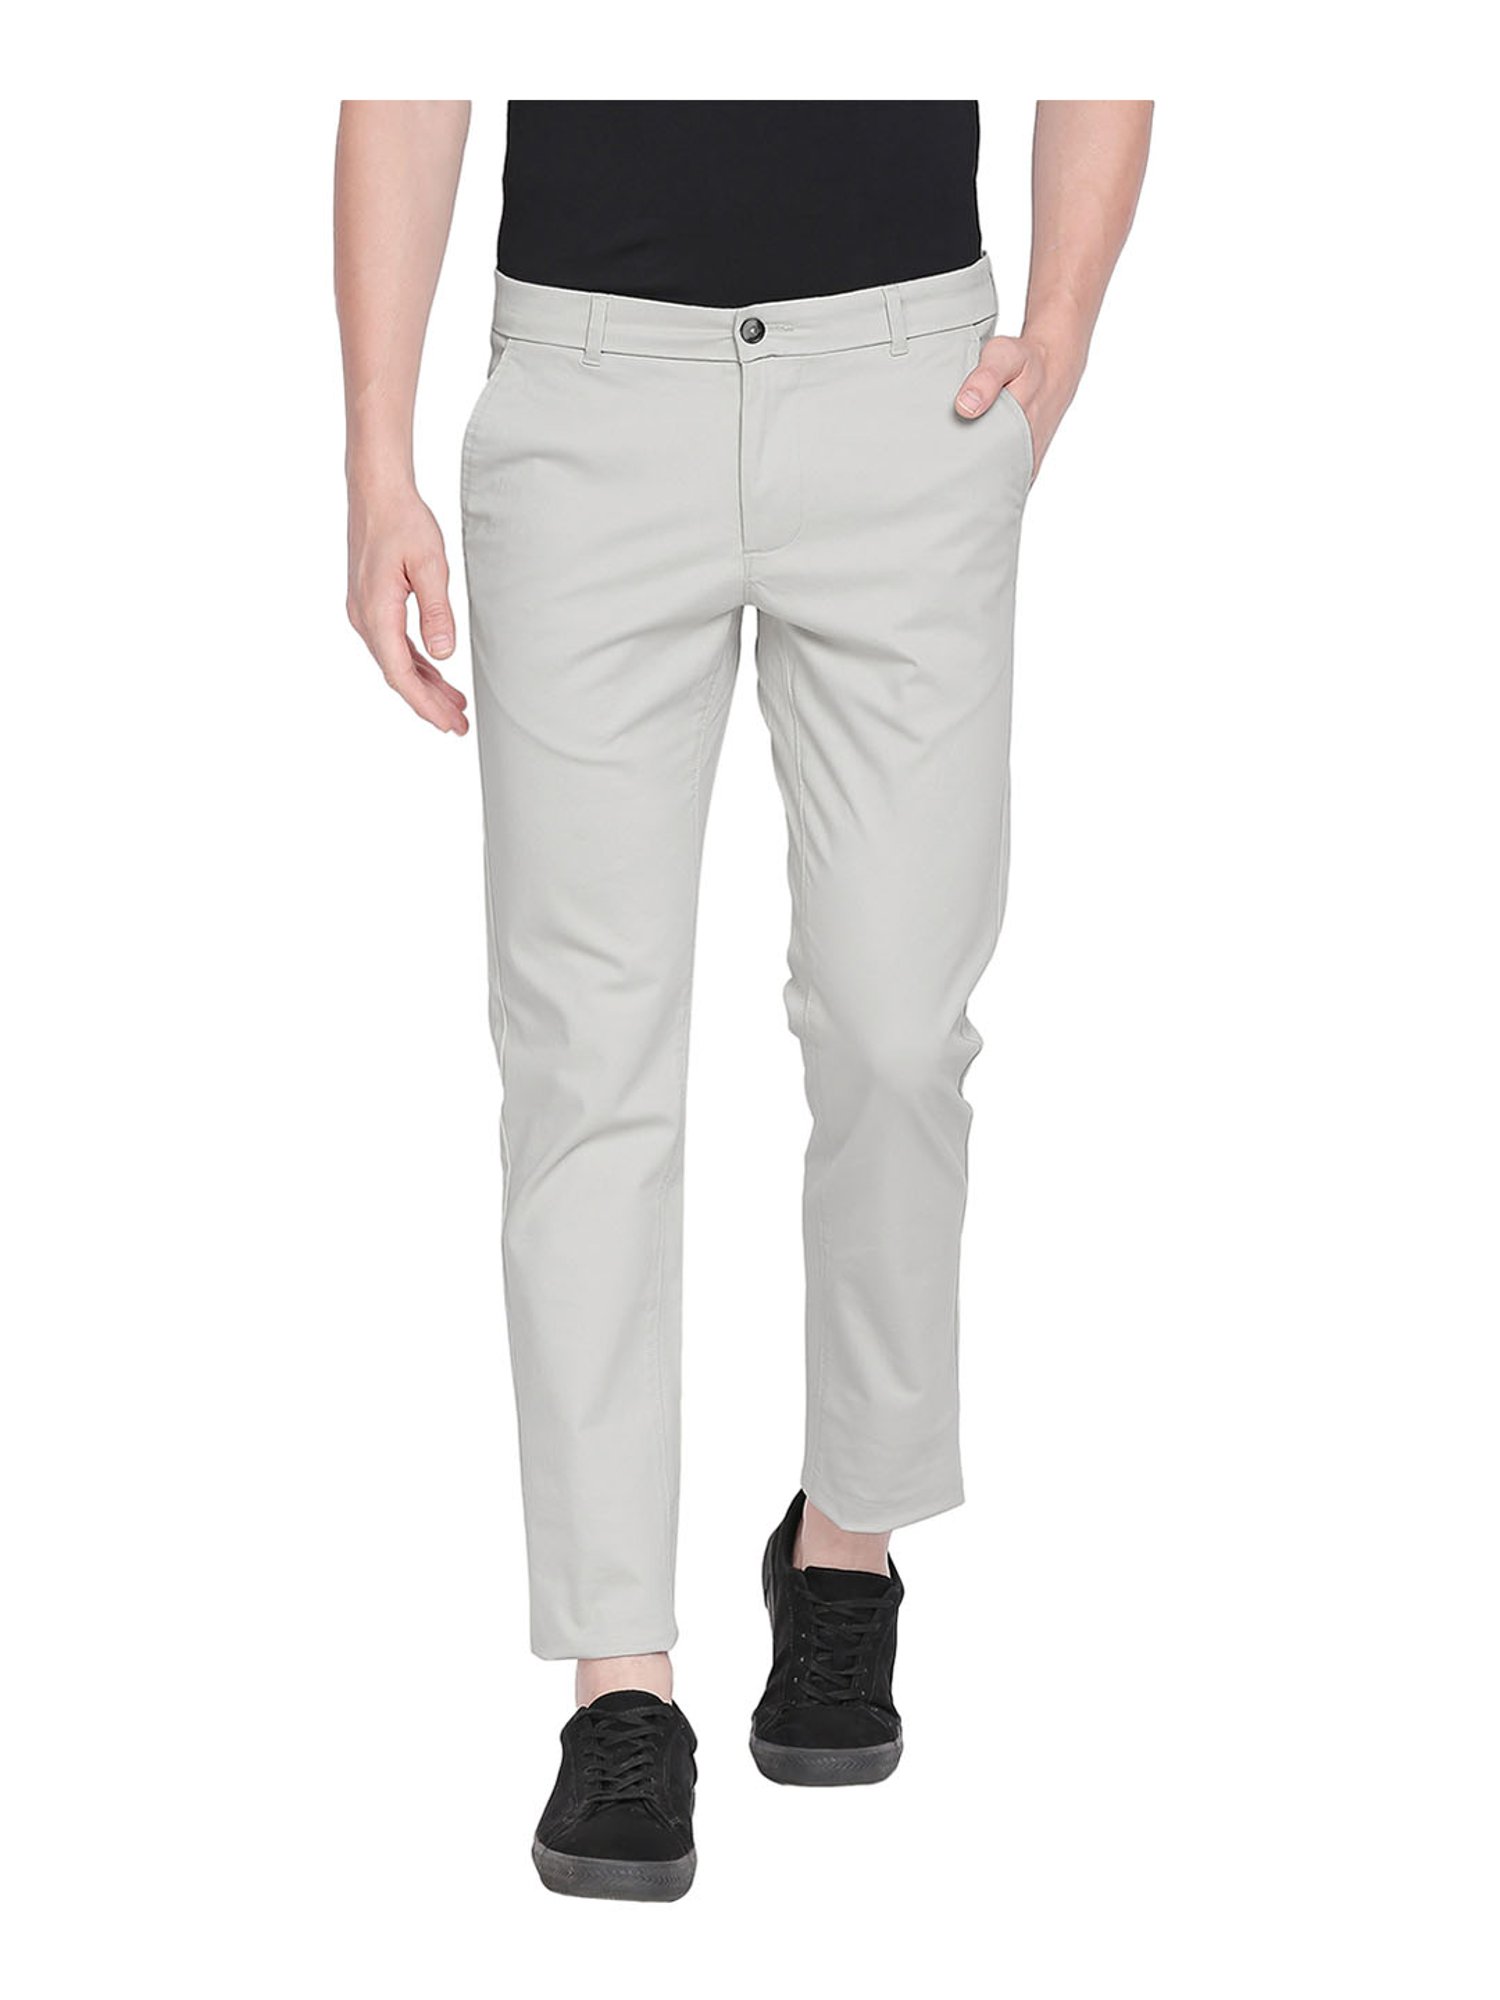 What Color Pants Go With Gray Shirt White Trousers Neutral Men Outfit Idea  Ins  Men fashion casual outfits Men fashion casual shirts Homecoming  outfits for guys